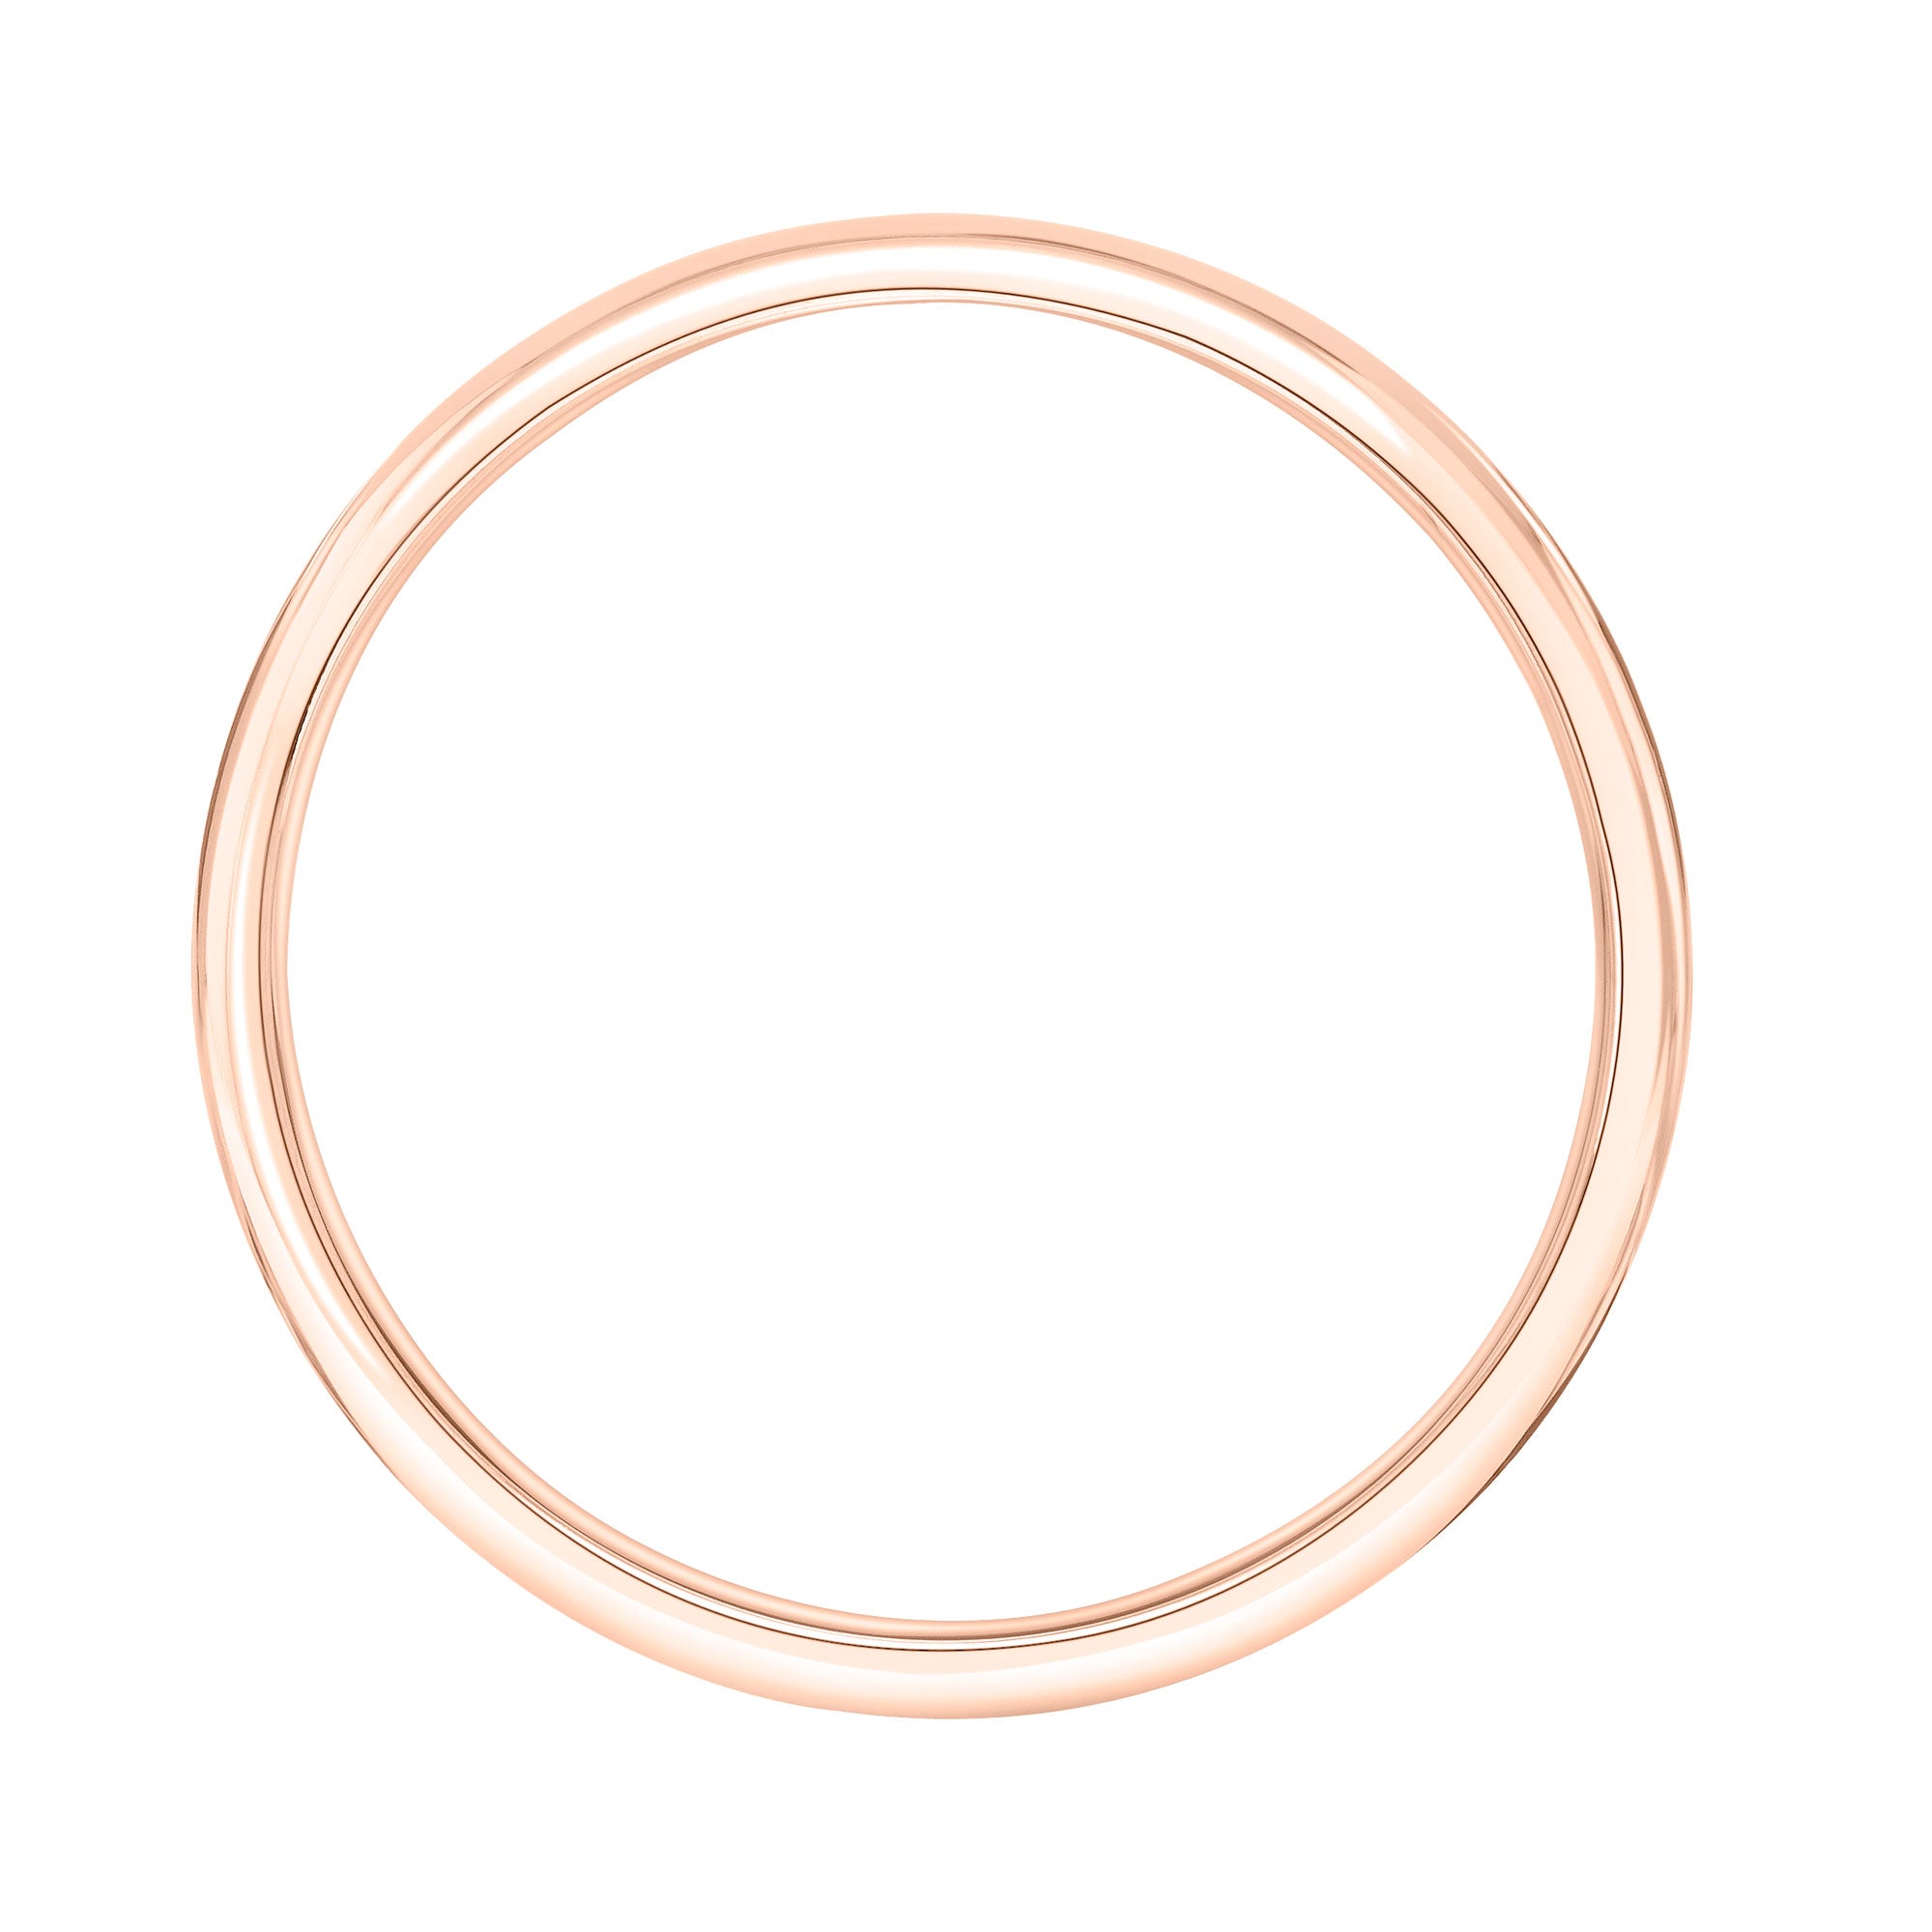 Roux 3mm Light Low Dome Wedding Ring